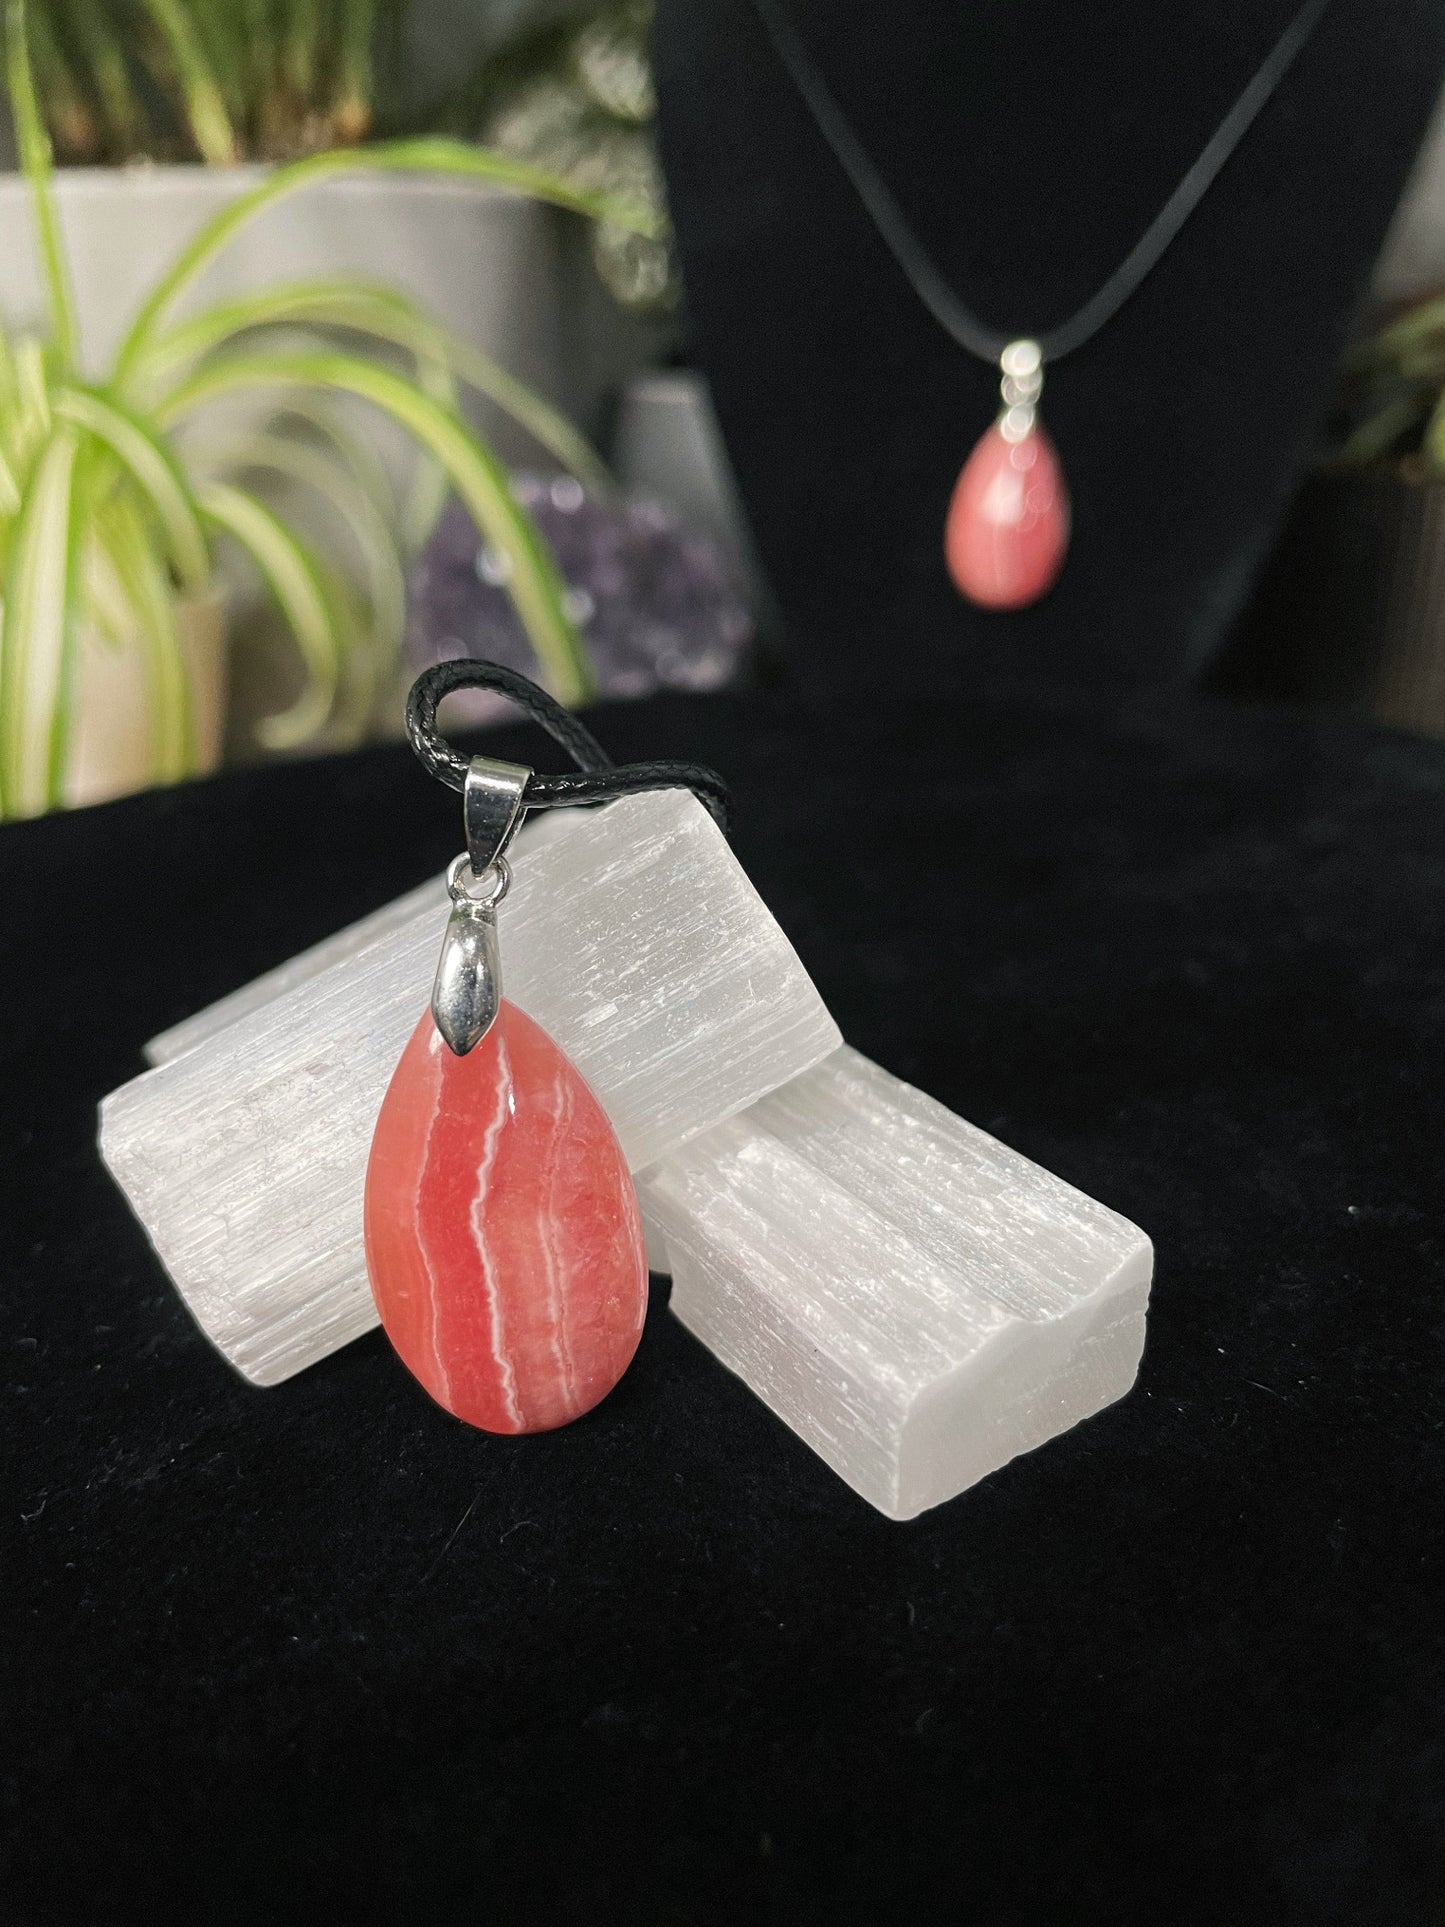 An image of a high-quality pink rhodochrosite teardrop shaped pendant on a necklace. It sits atop some selenite chunks and a black velvet surface.